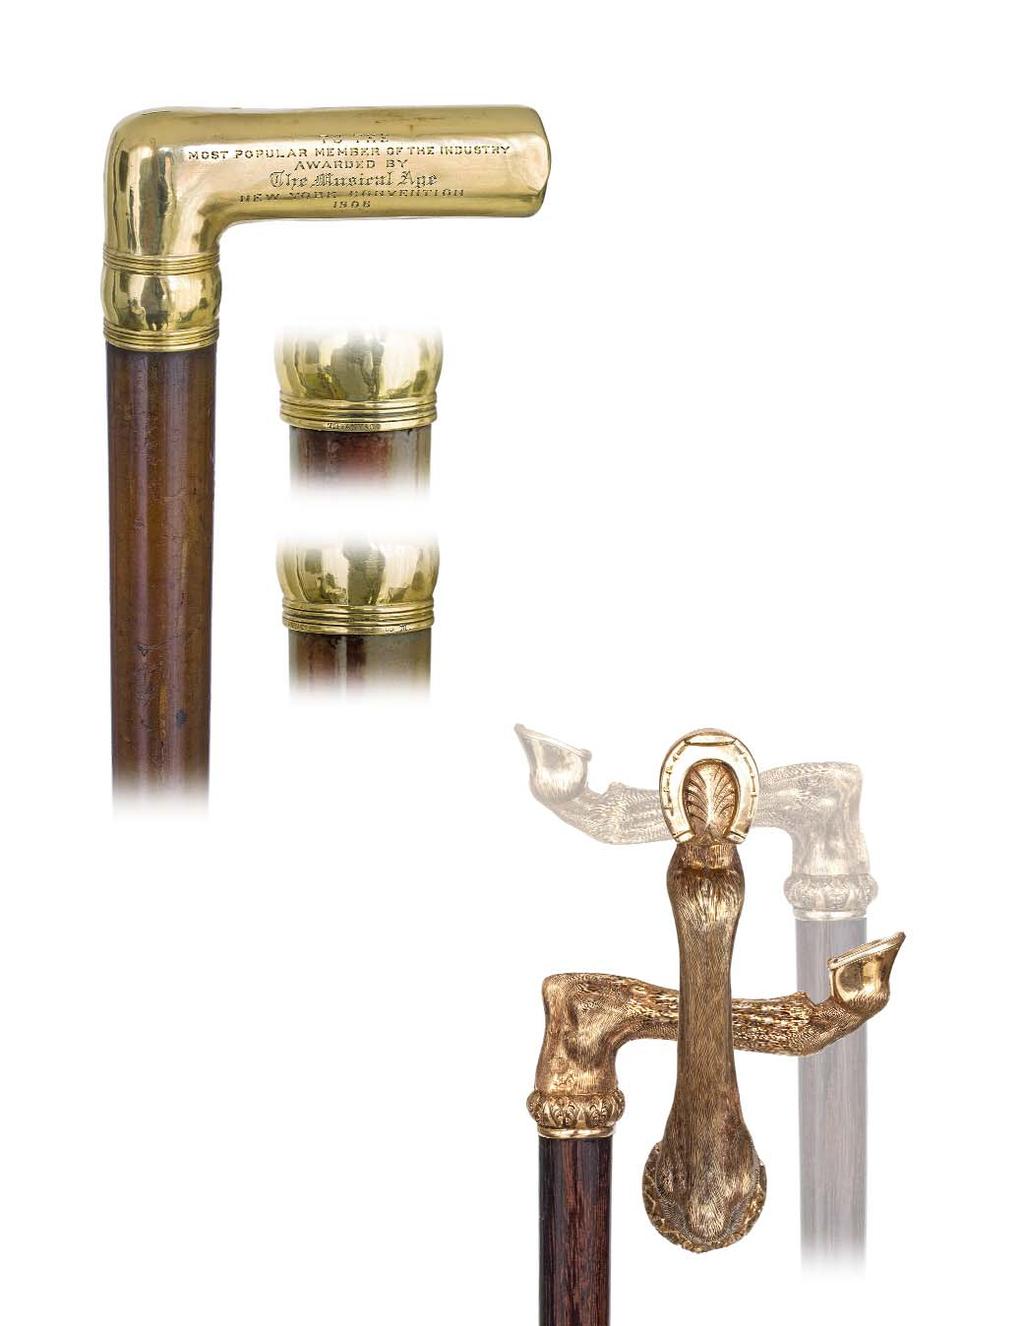 33 33. Tiffany Presentation Gold Cane USA, Early 20th Century-Substatntial L-shaped 18 karat yellow gold handle (over two ounces) on a full bark malacca shaft with a horn ferrule.